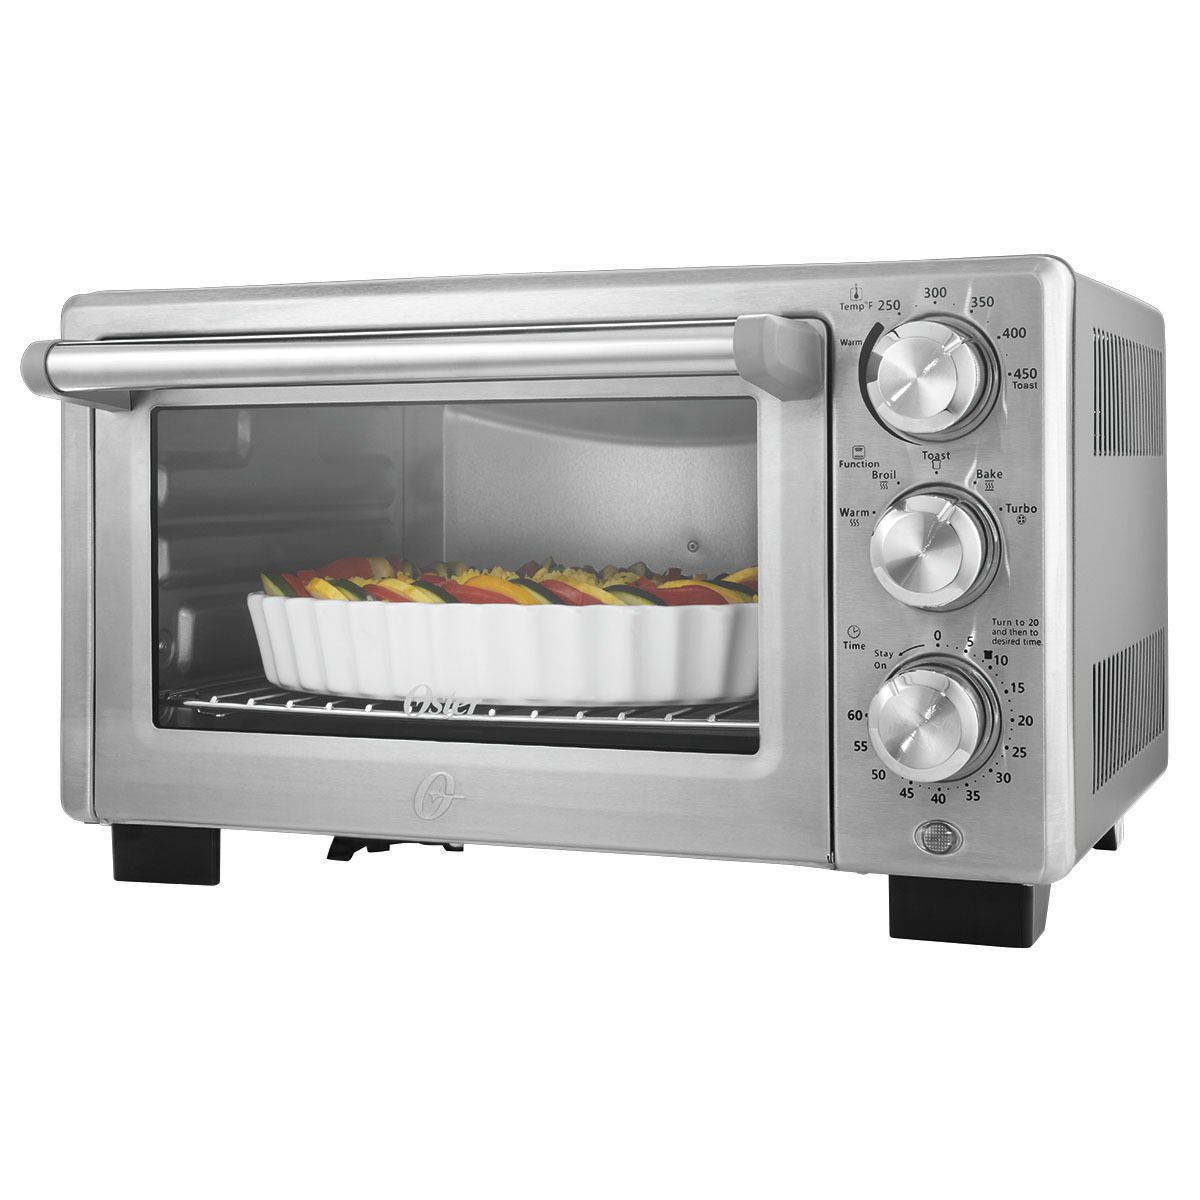 An image of Oster TSSTTVDFL2 Stainless Steel Countertop Toaster Oven | Toasty Ovens 